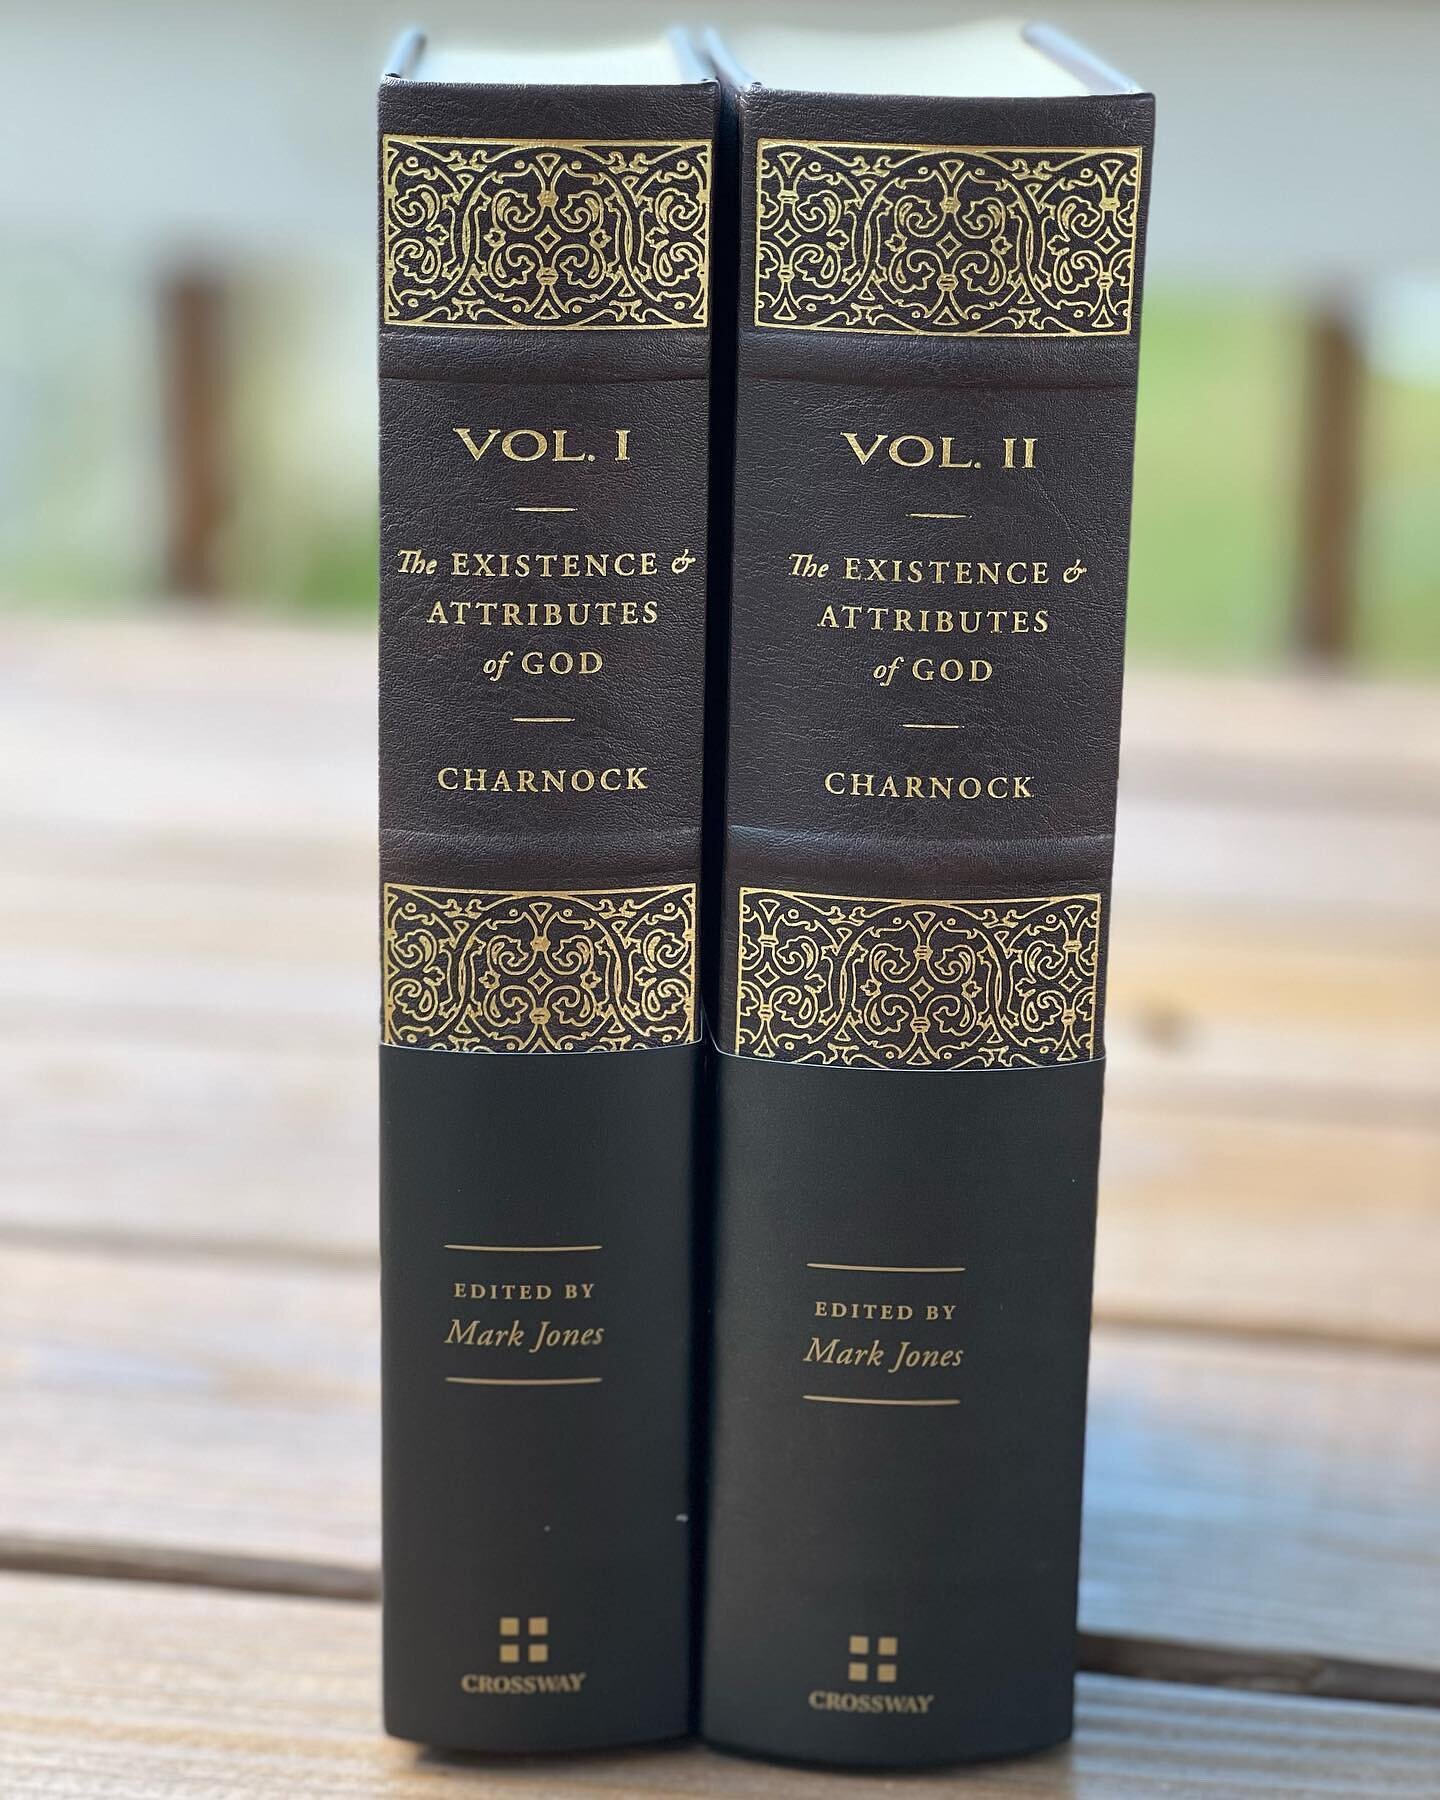 This two-volume set, edited by Mark Jones, contains an updated and unabridged edition of Charnock's classic work, Discourses upon the Existence and Attributes of God, written to instruct and encourage Christian pastors, theologians, and laypeople. Jo